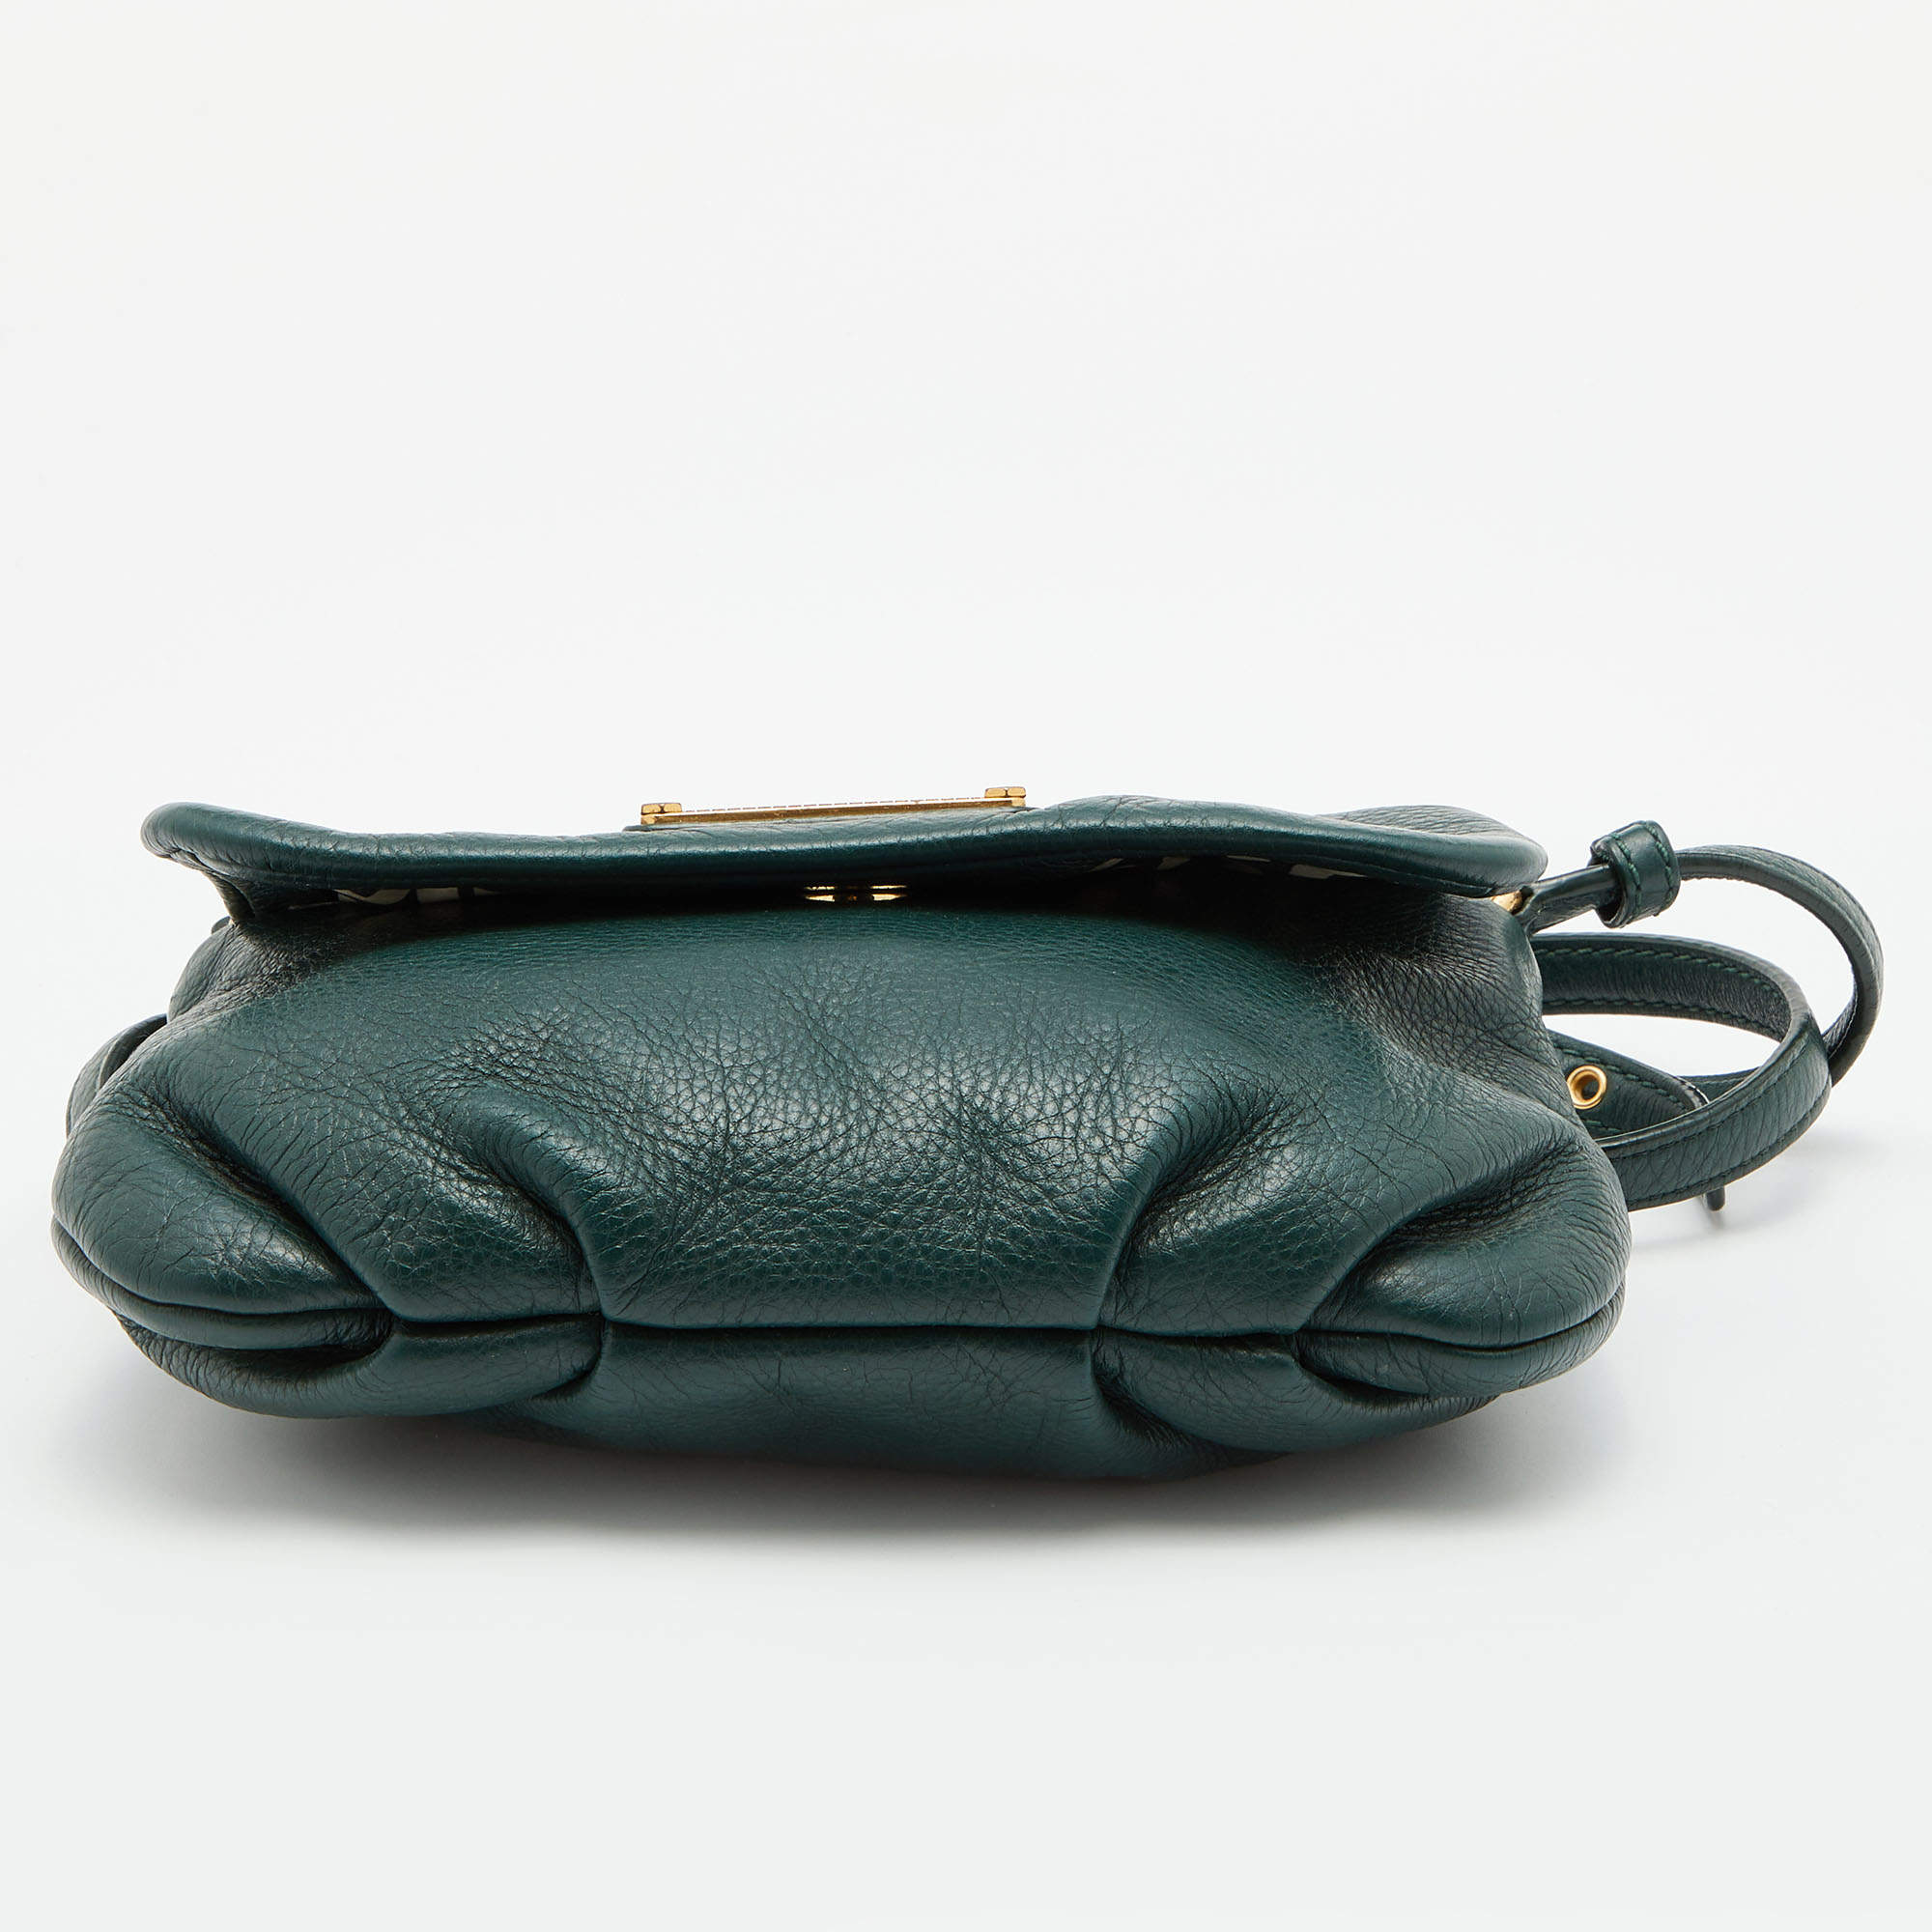 Marc By Marc Jacobs Fatigue Green Leather Crossbody Bag Marc by Marc Jacobs